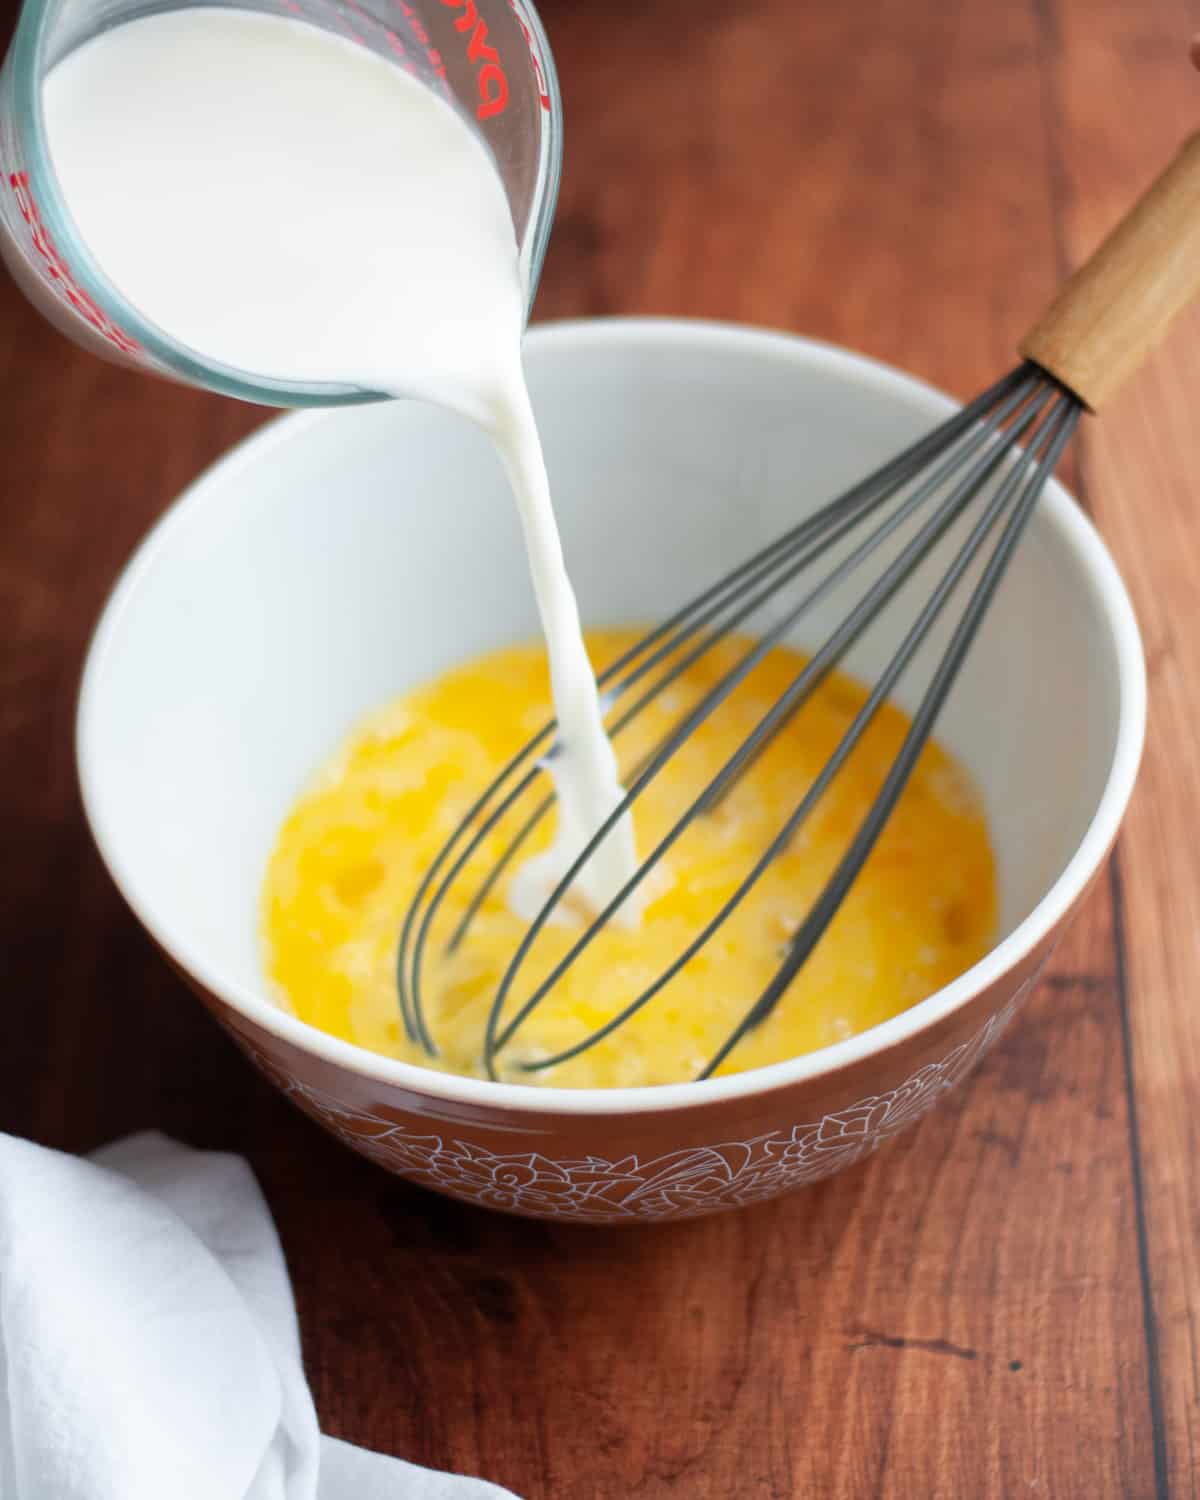 process shot showing how to make the custard for brioche french toast bake. image shows milk and cream being poured into whisked eggs in a medium mixing bowl with a whisk.